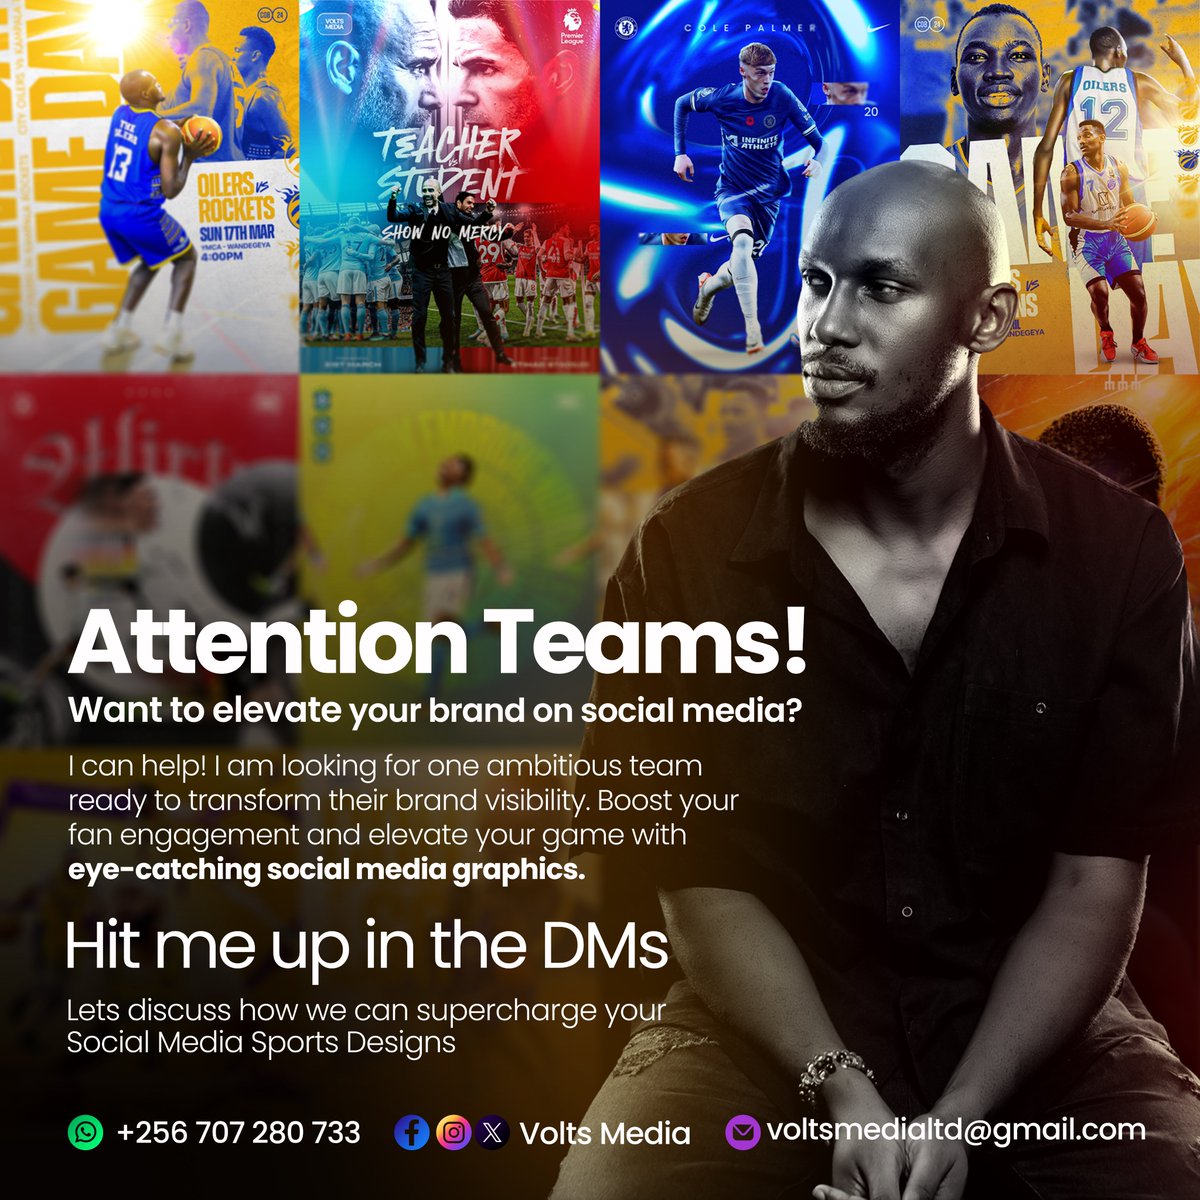 APRIL IS HERE AND ITS TIME TO BLOSSOM Are you that Team? Do you know that Team?. Mention, Tag or Send them this Post. Lets Help them achieve their Goals on Social Media.